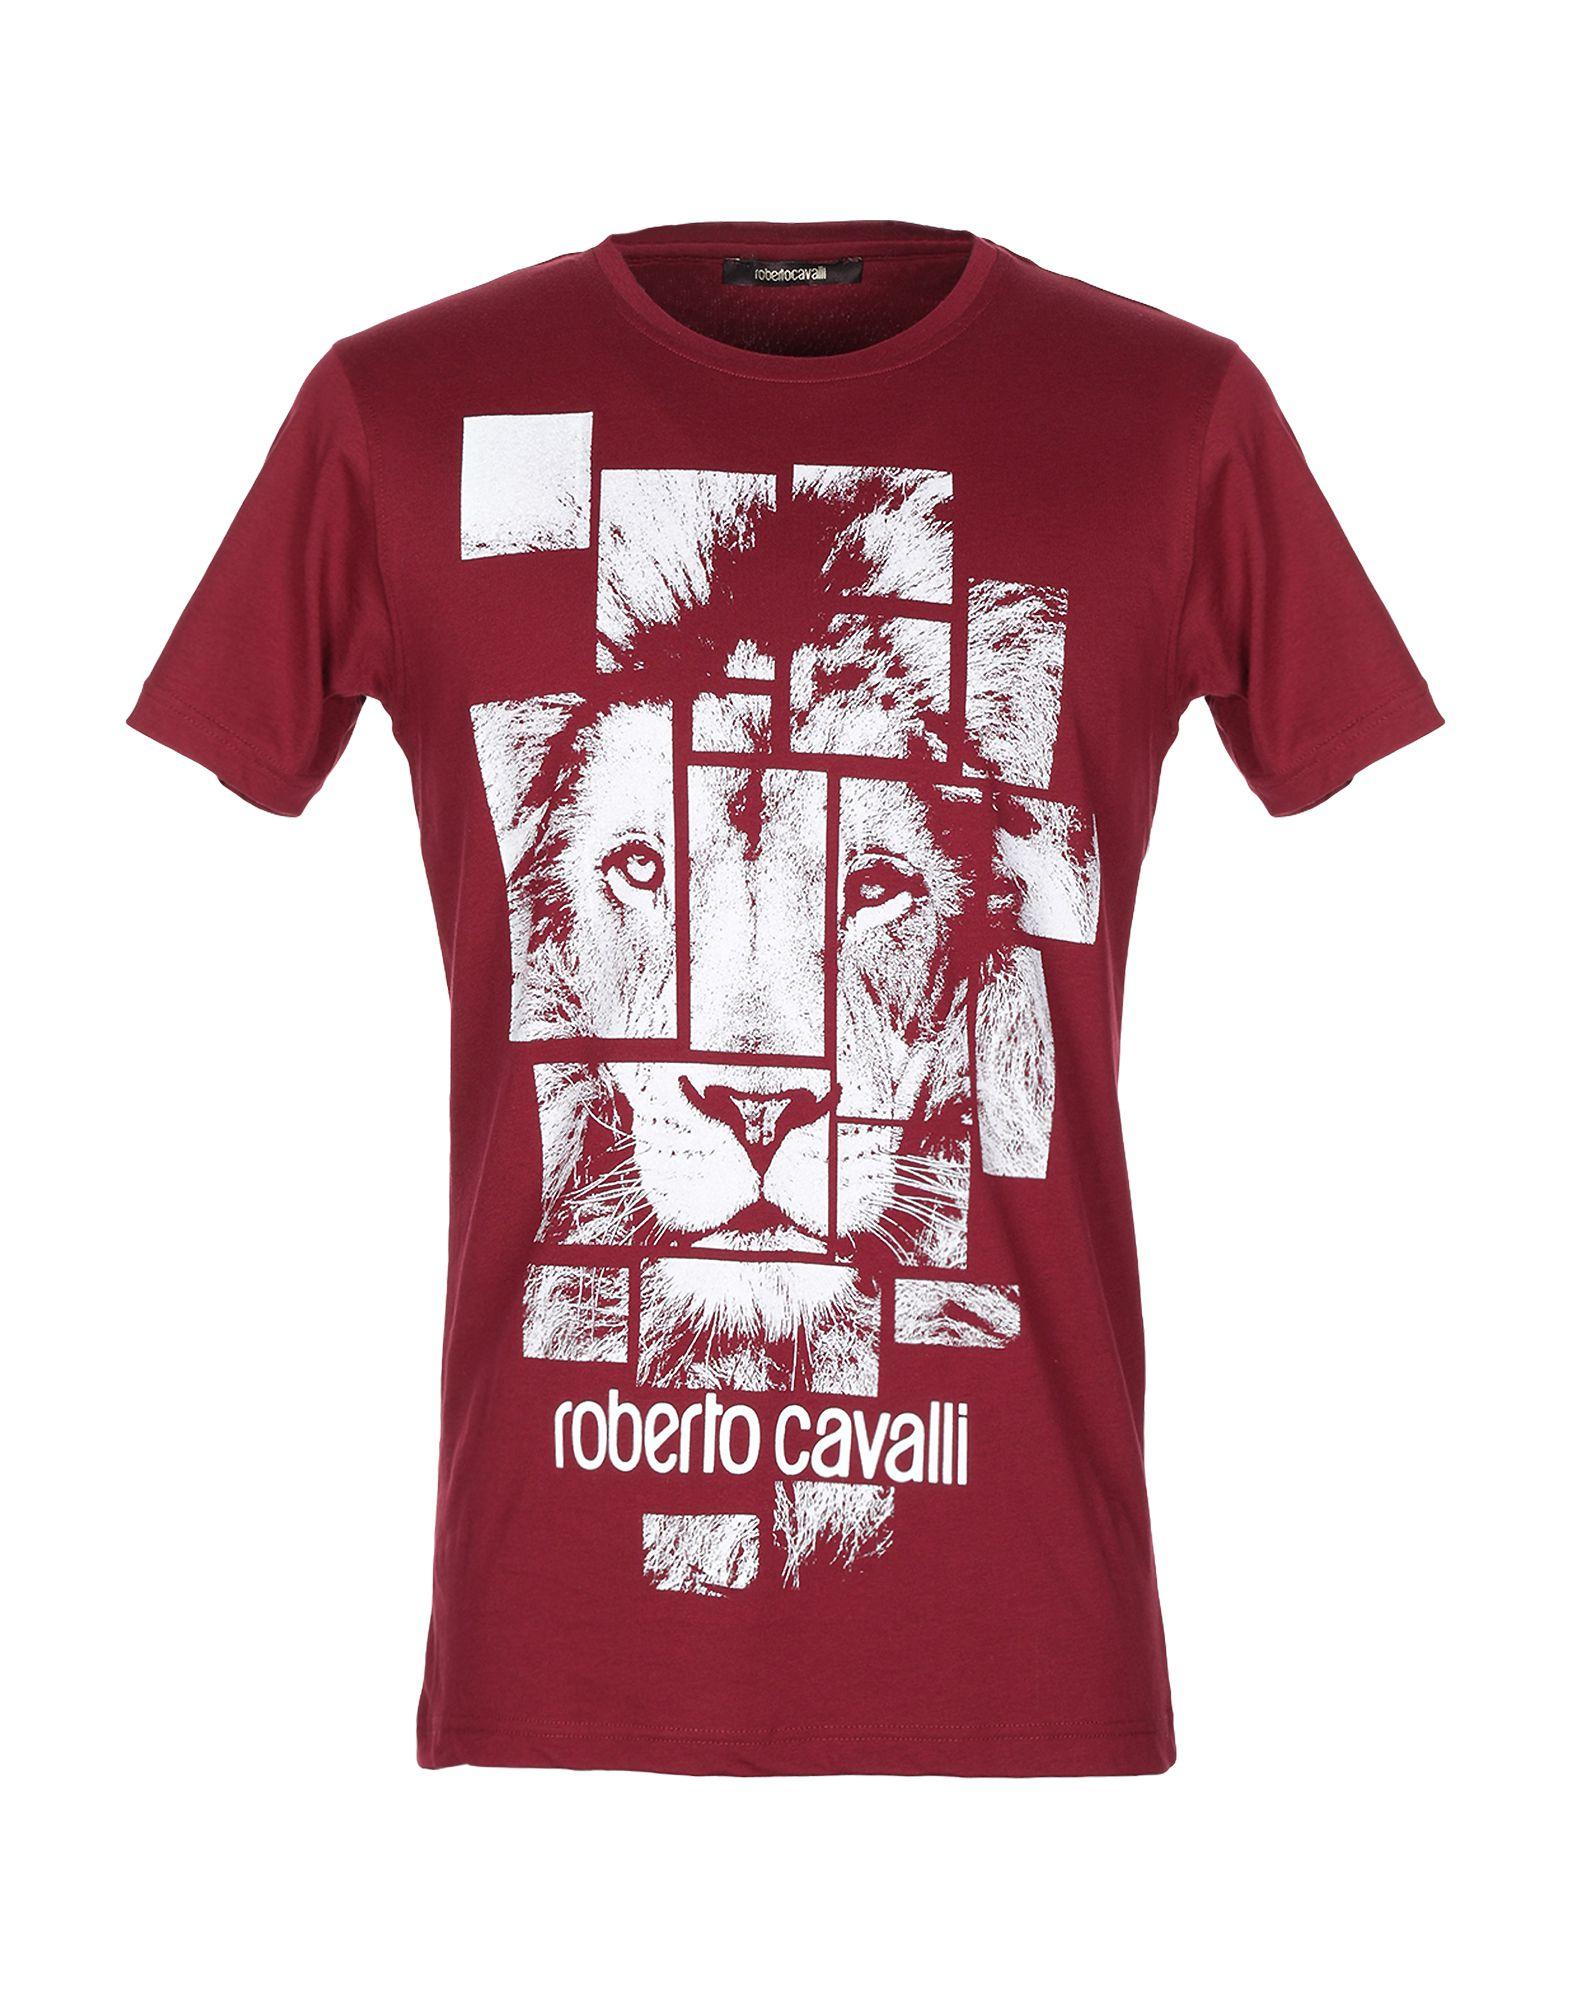 Roberto Cavalli Cotton T-shirt in Maroon (Red) for Men - Lyst